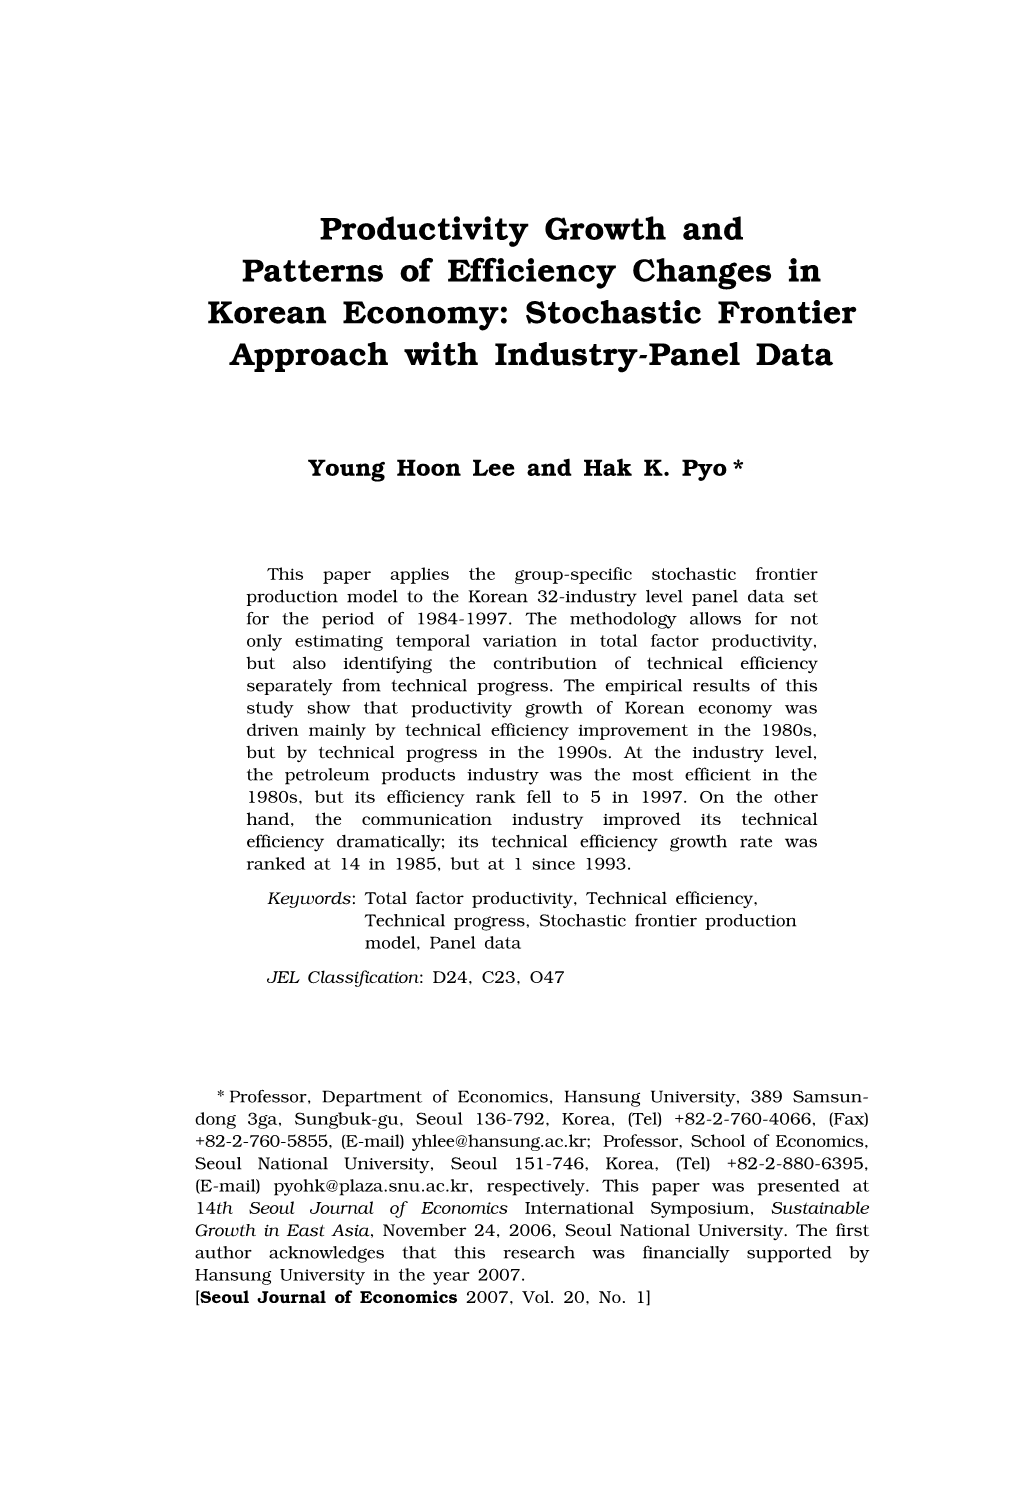 Productivity Growth and Patterns of Efficiency Changes in Korean Economy: Stochastic Frontier Approach with Industry-Panel Data